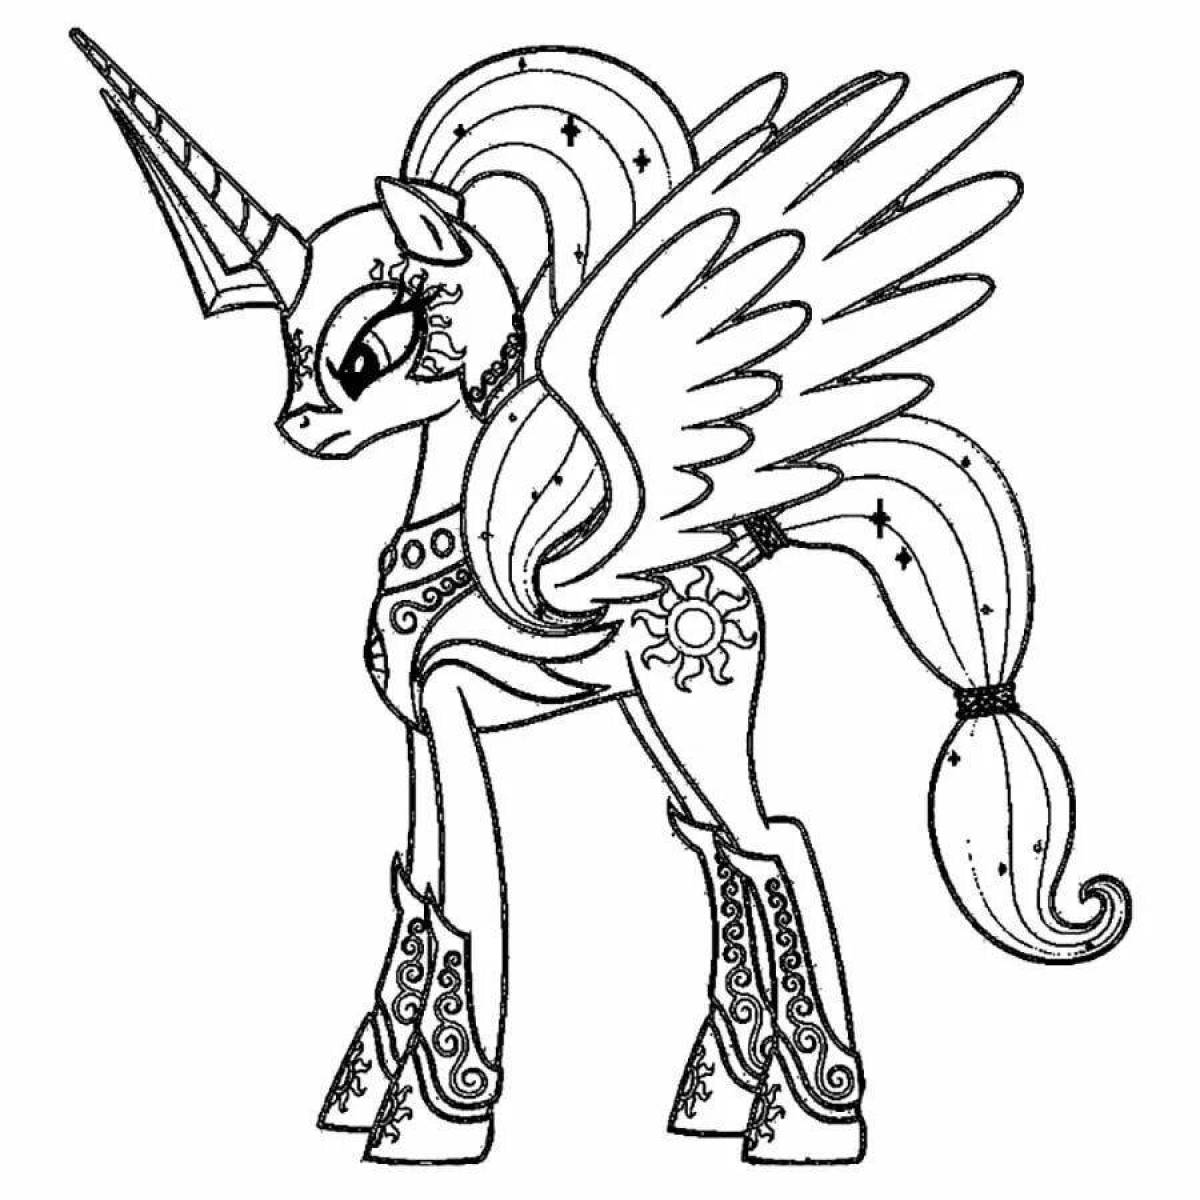 My little pony's sinister coloring book